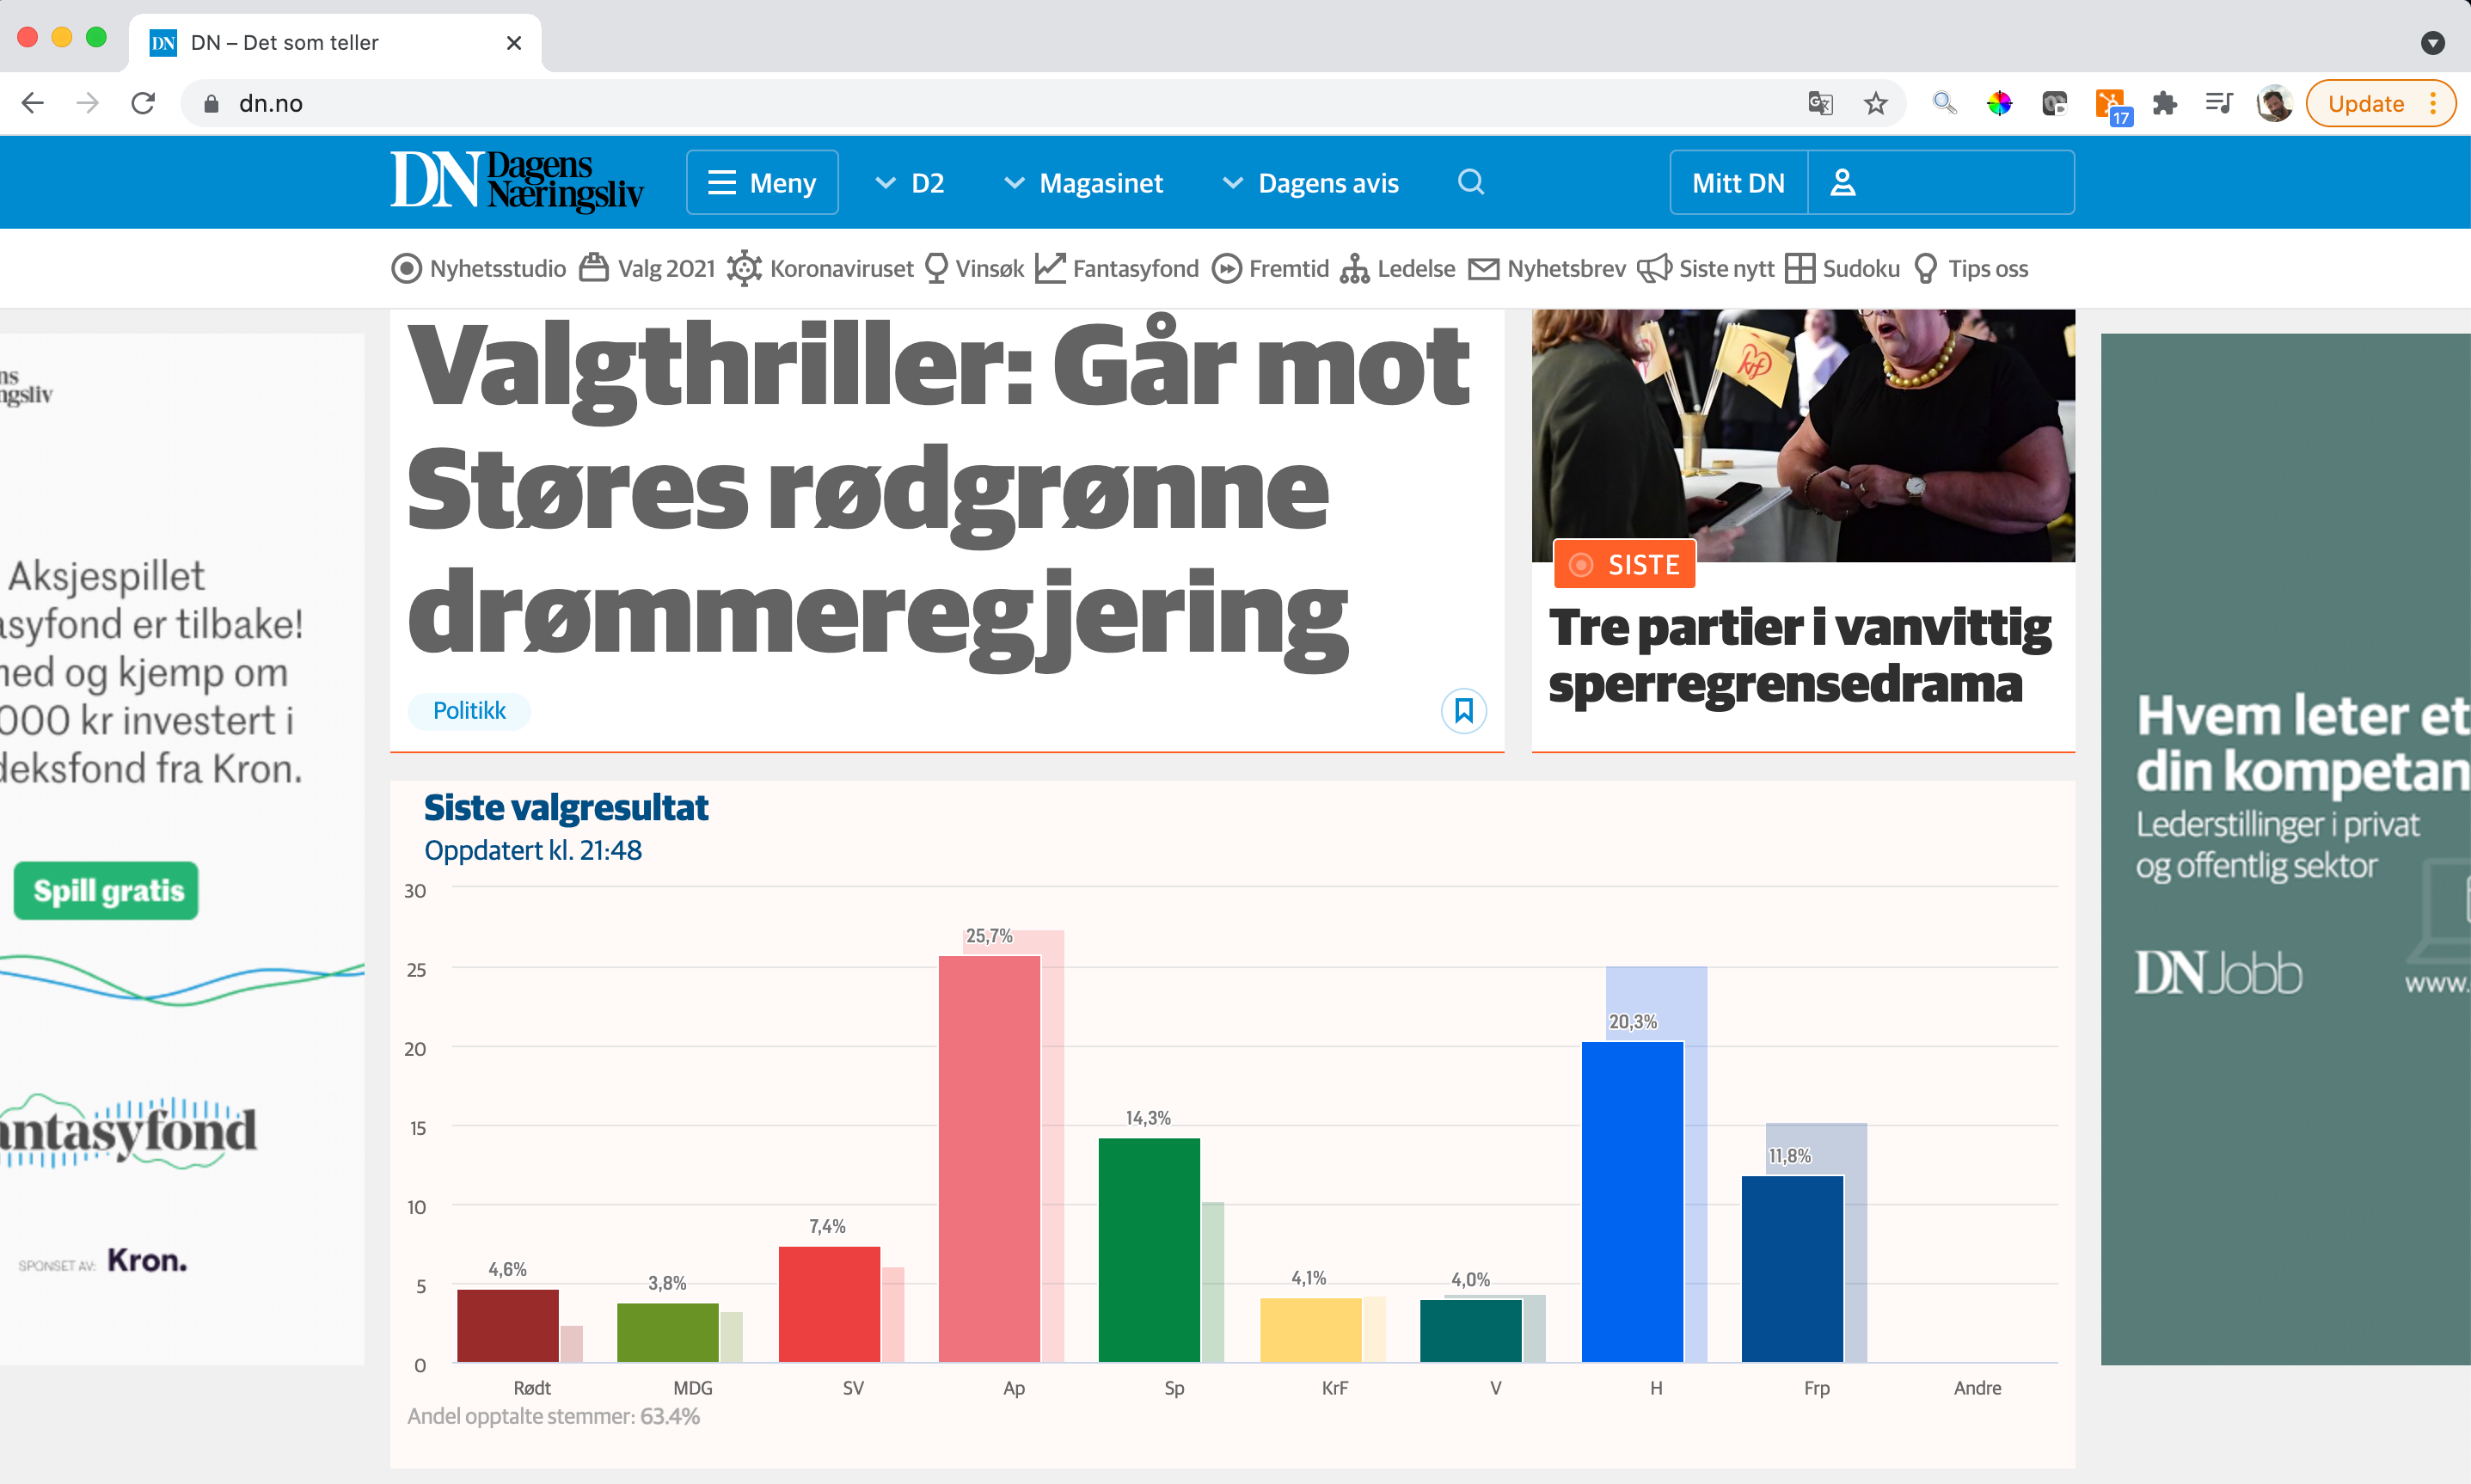 Screenshot of Front page of dn.no during the election